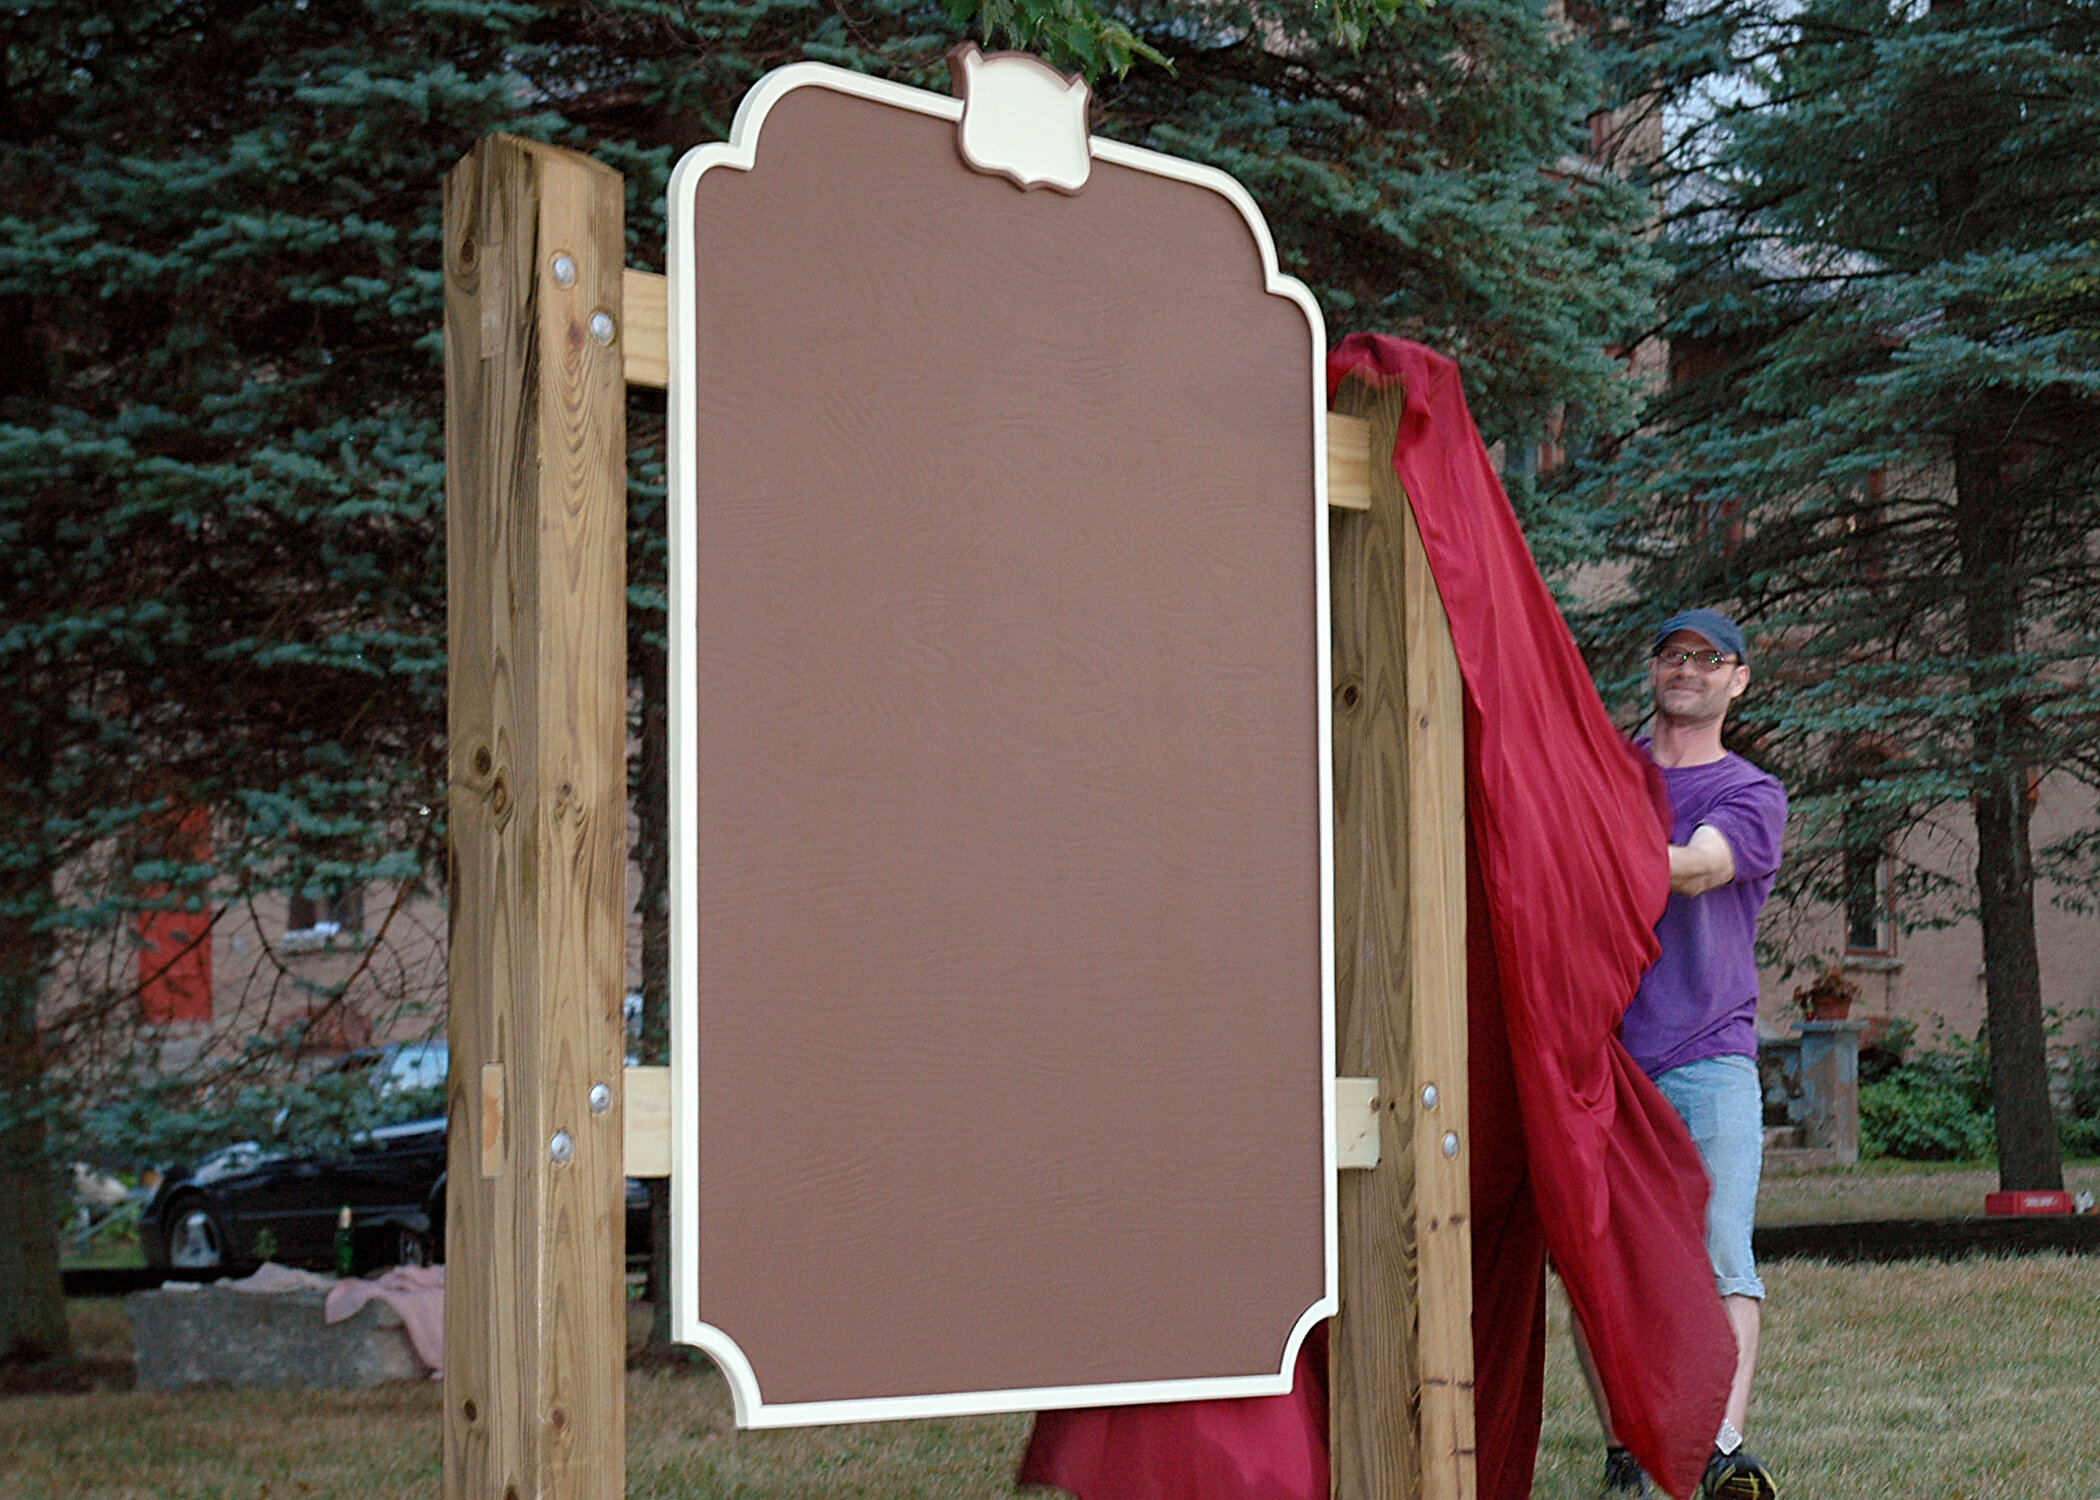  Man in purple shirt, jean shorts, and black hat fully removes red fabric, revealing plaque.